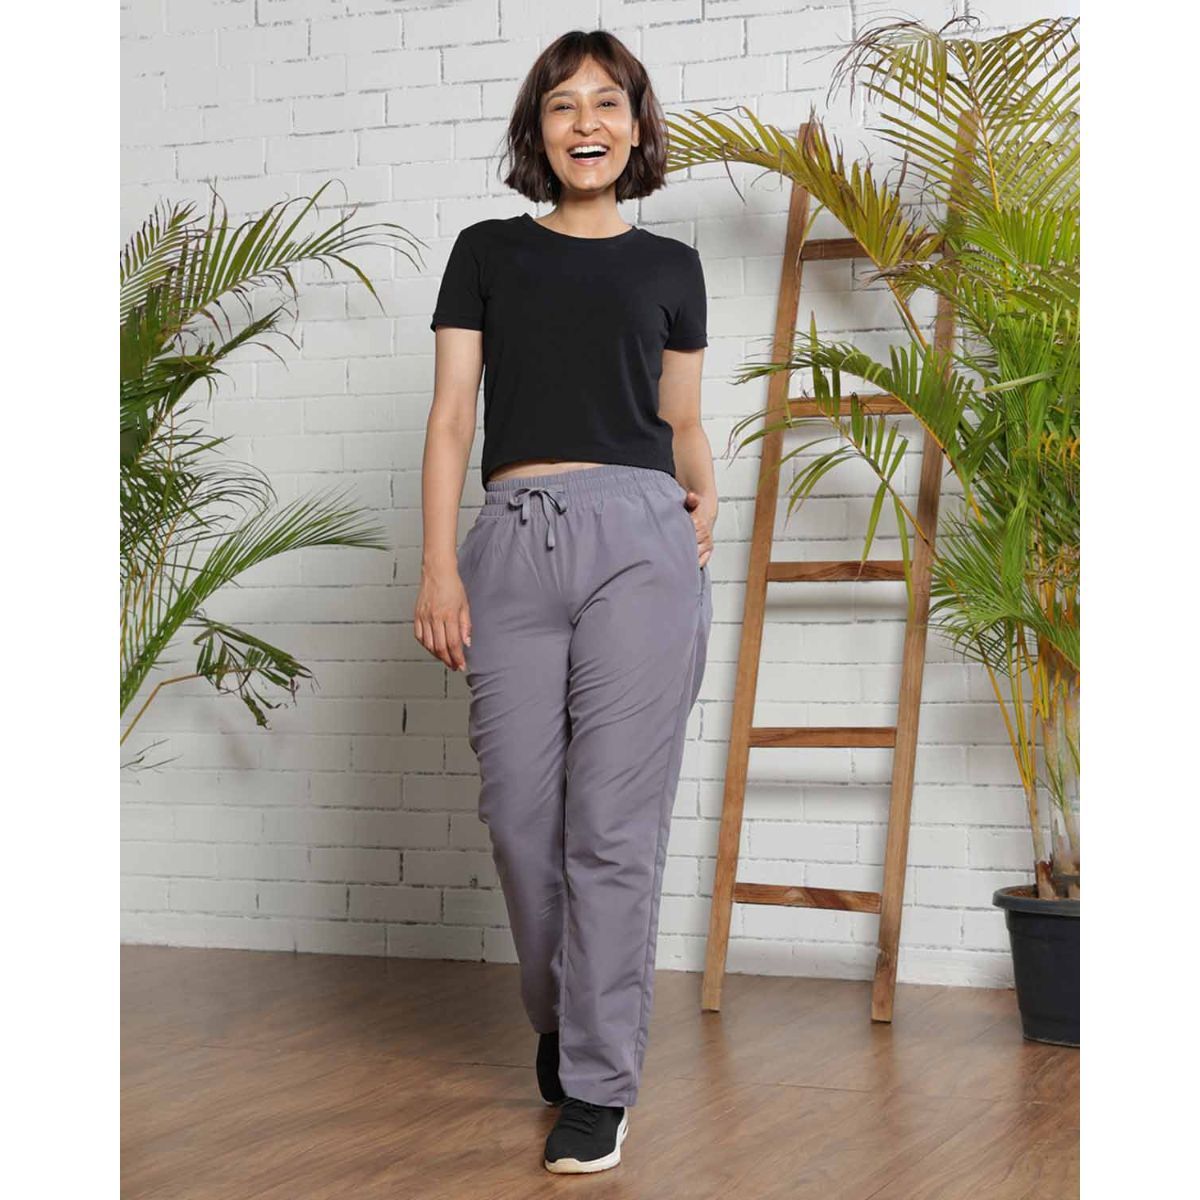 Buy Bliss Club Women Grey All Terrain Pants with Water-repellent